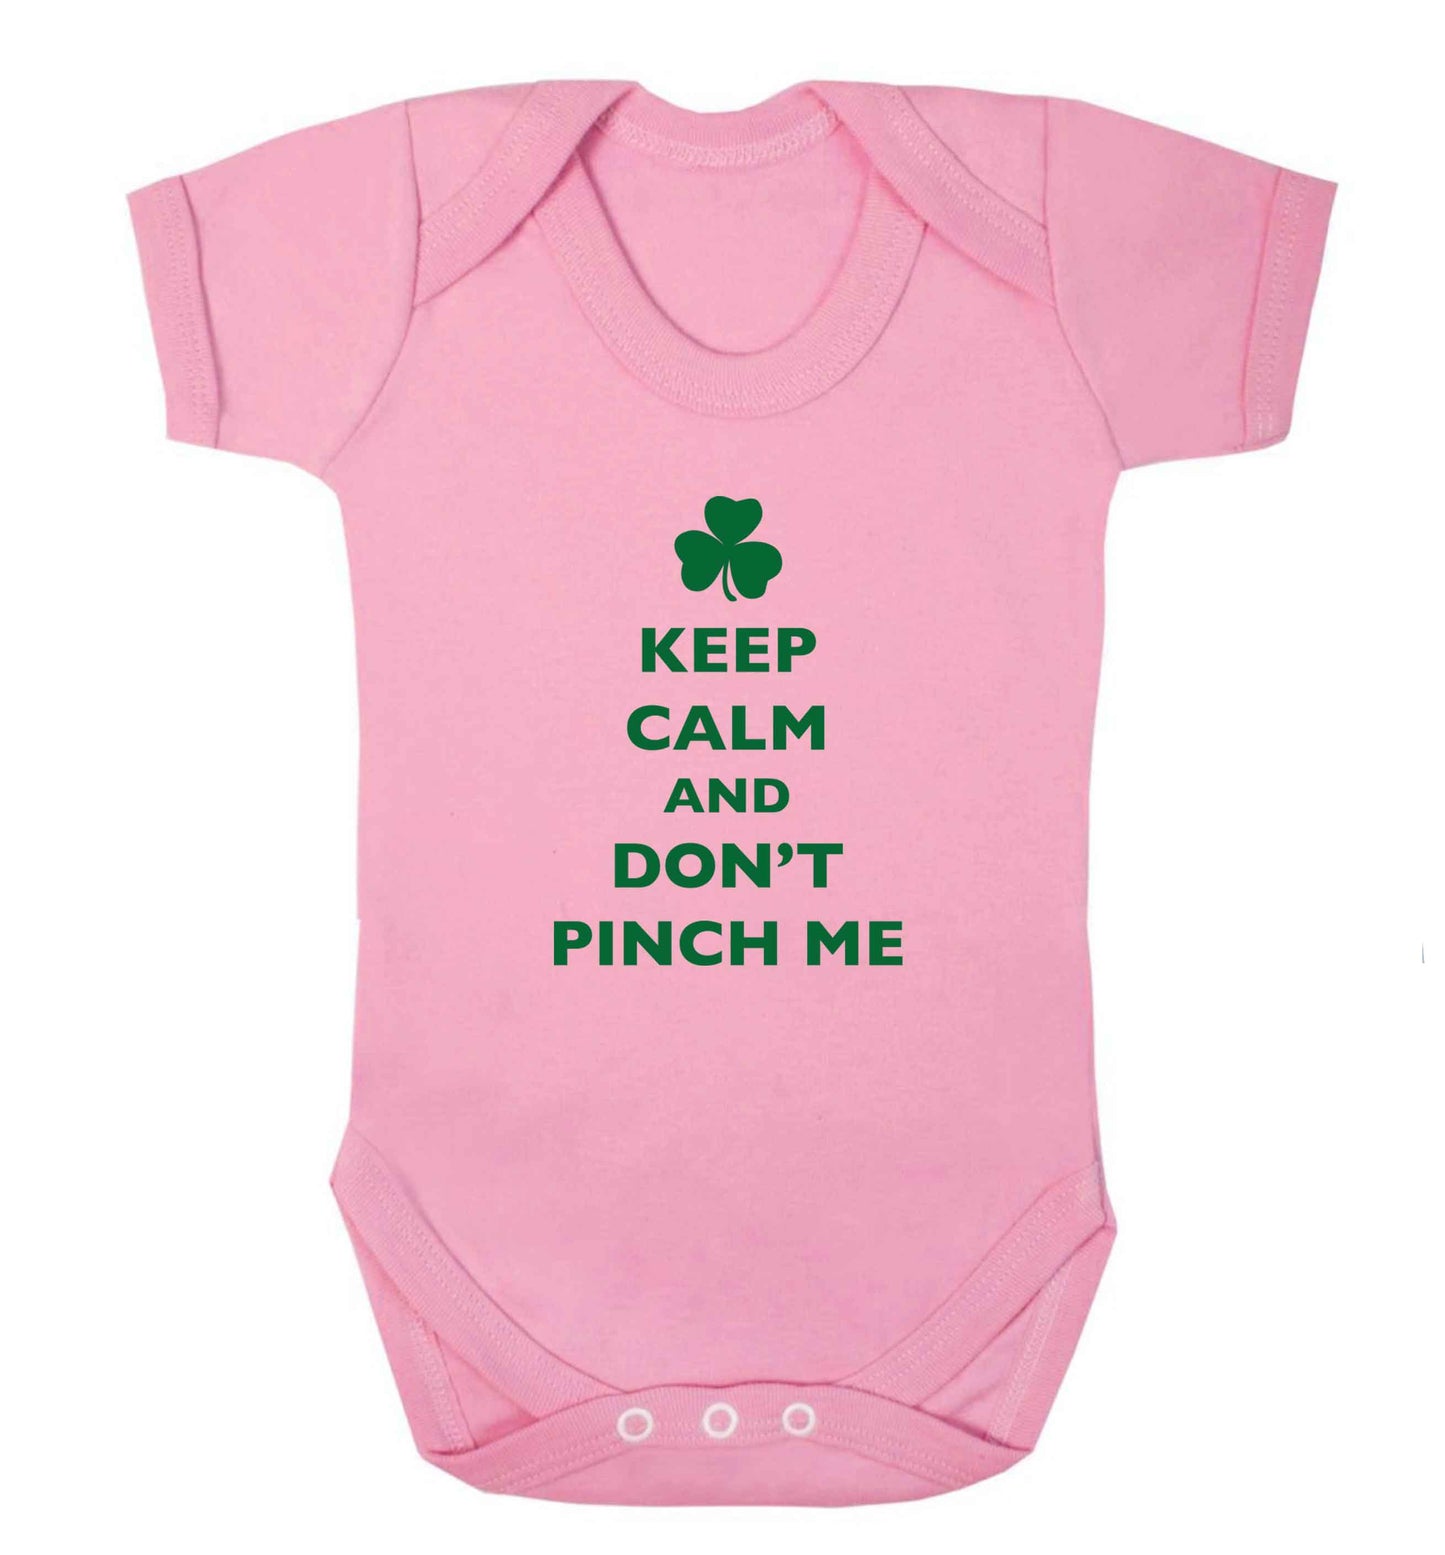 Keep calm and don't pinch me baby vest pale pink 18-24 months